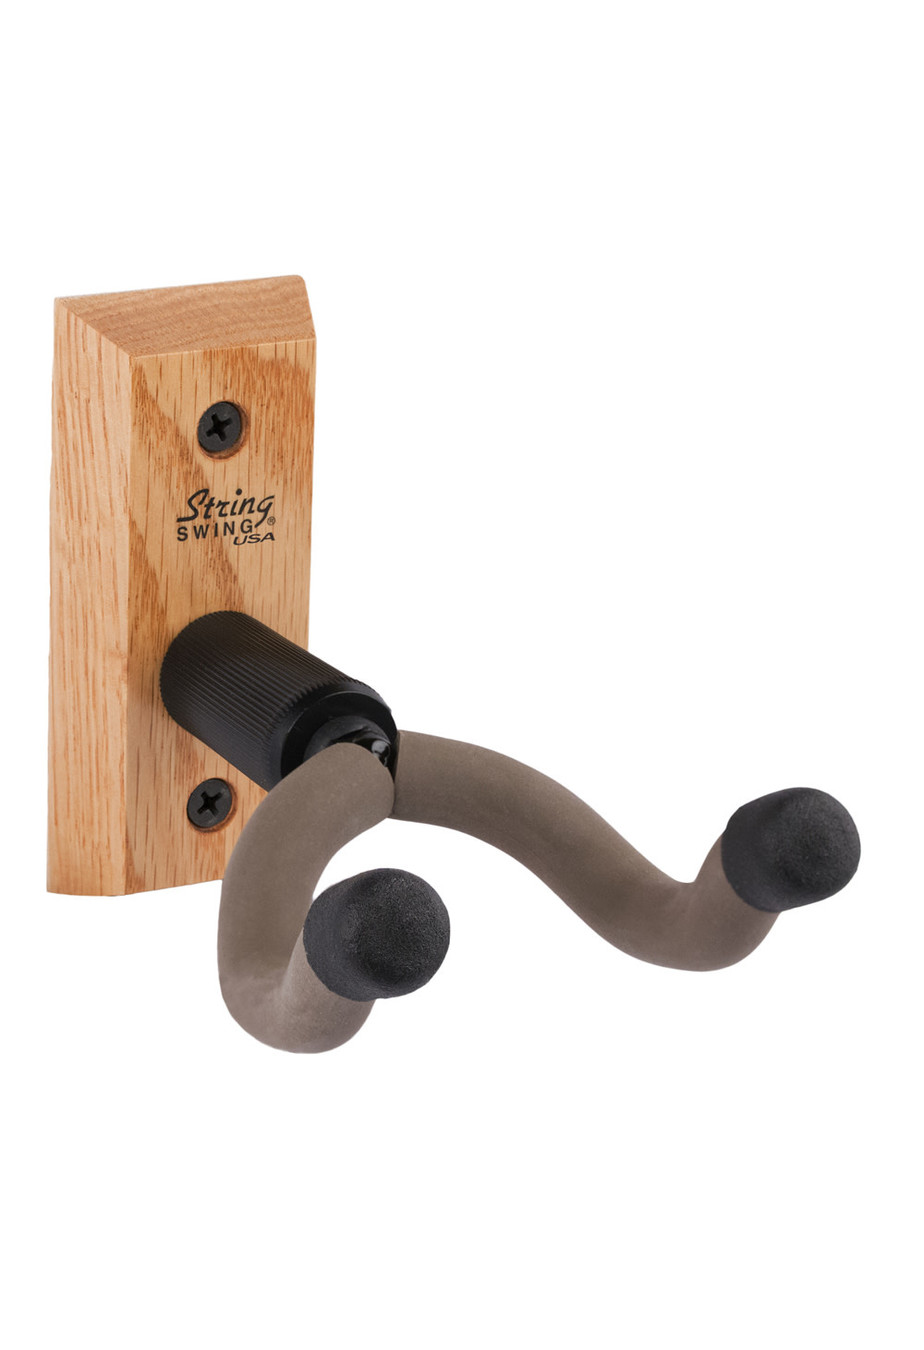 String Swing USA String Swing CC01K Guitar Hanger Wall Mount for Acoustic and Electric Guitars Oak